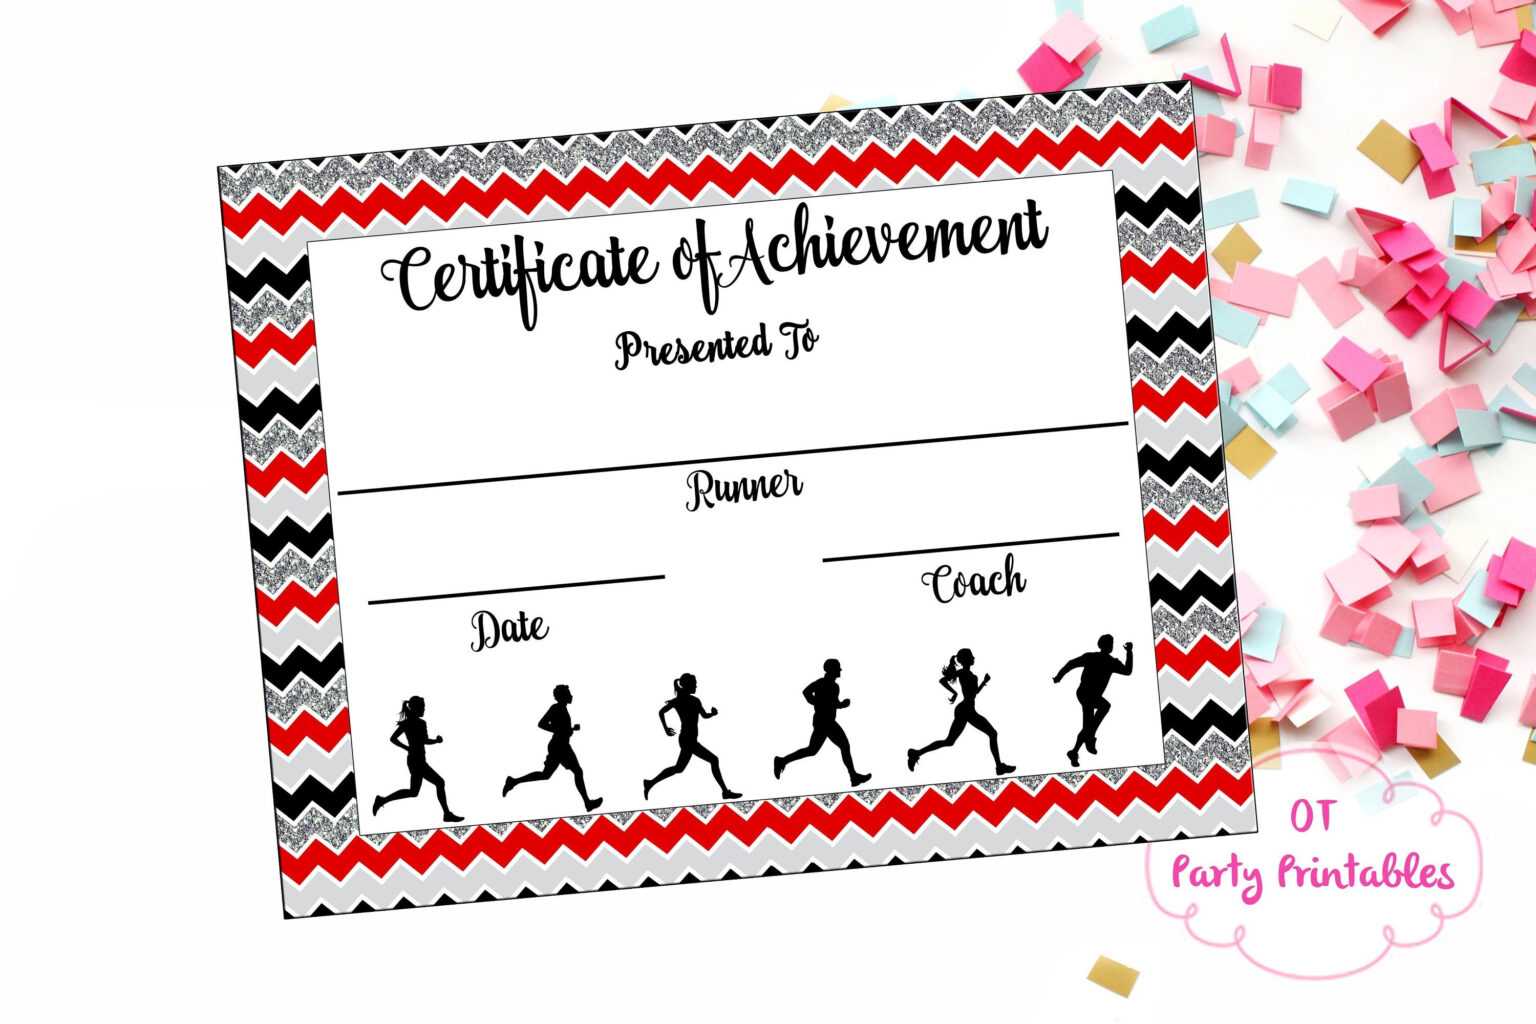 cross-country-certificate-jog-a-thon-award-running-templates-intended-for-running-certificates